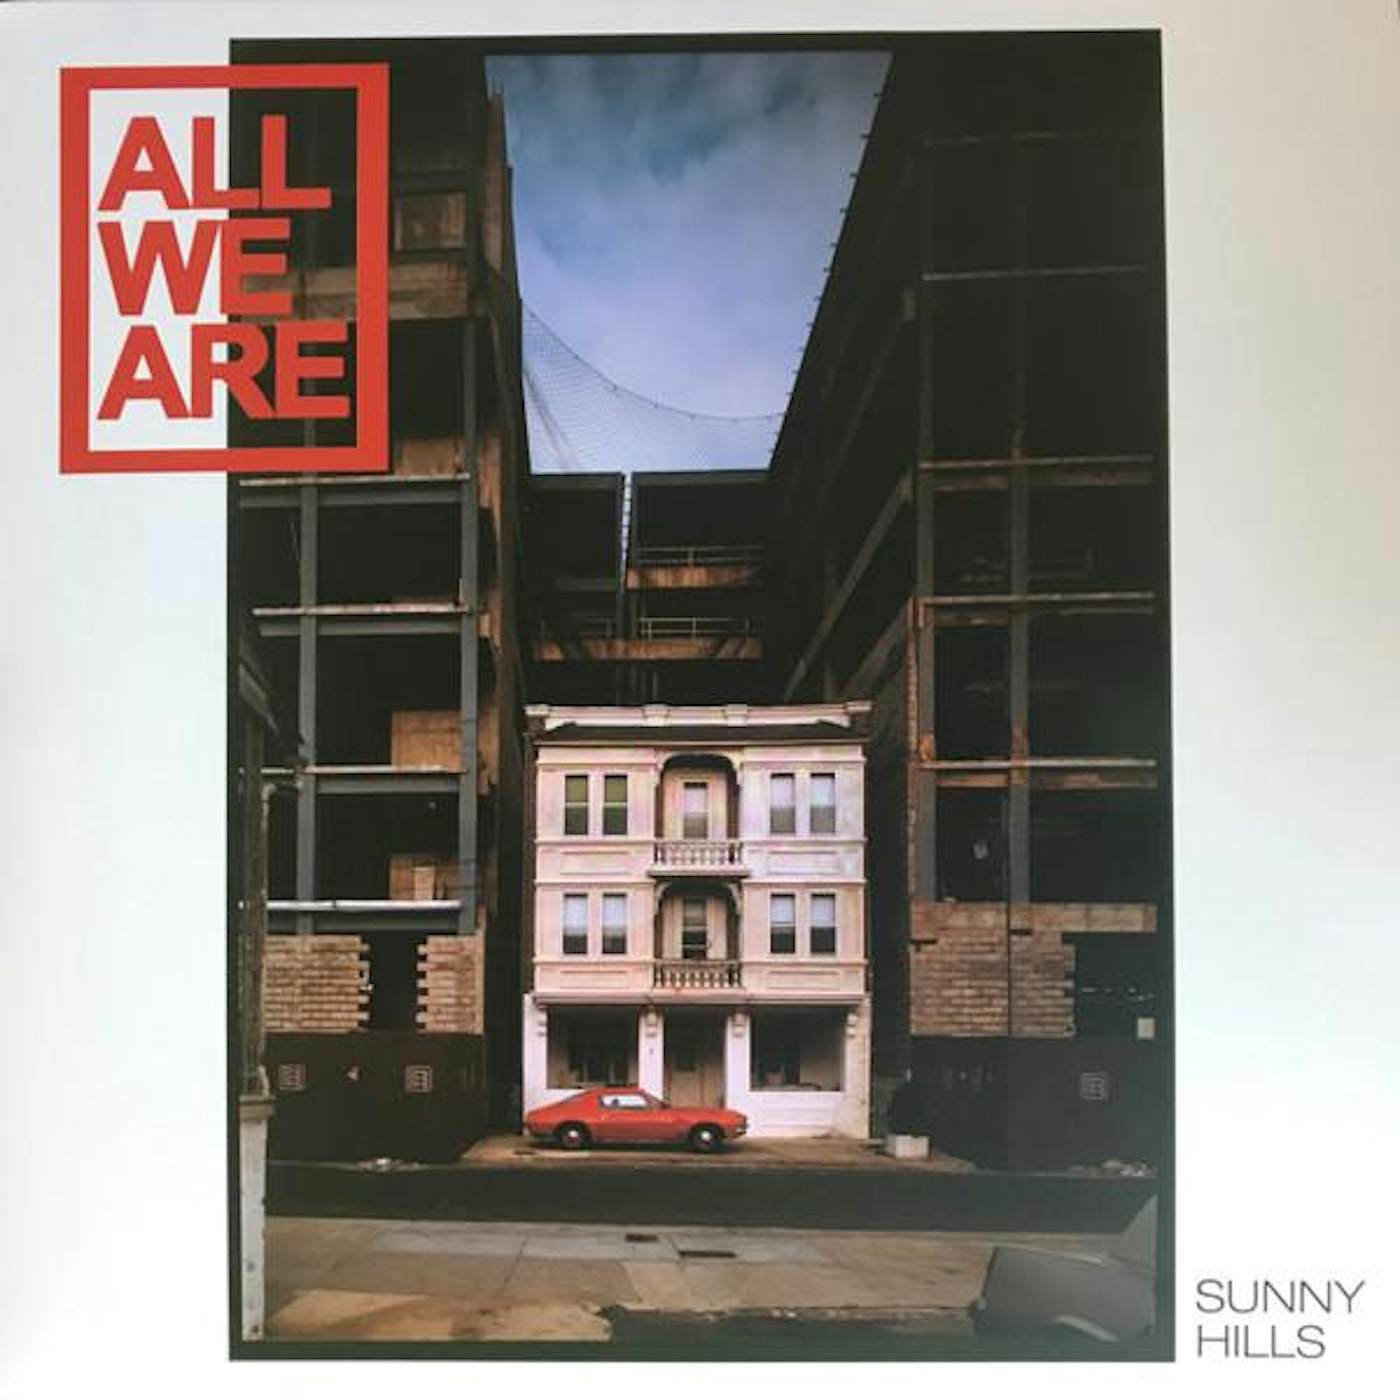 All We Are Sunny Hills Vinyl Record